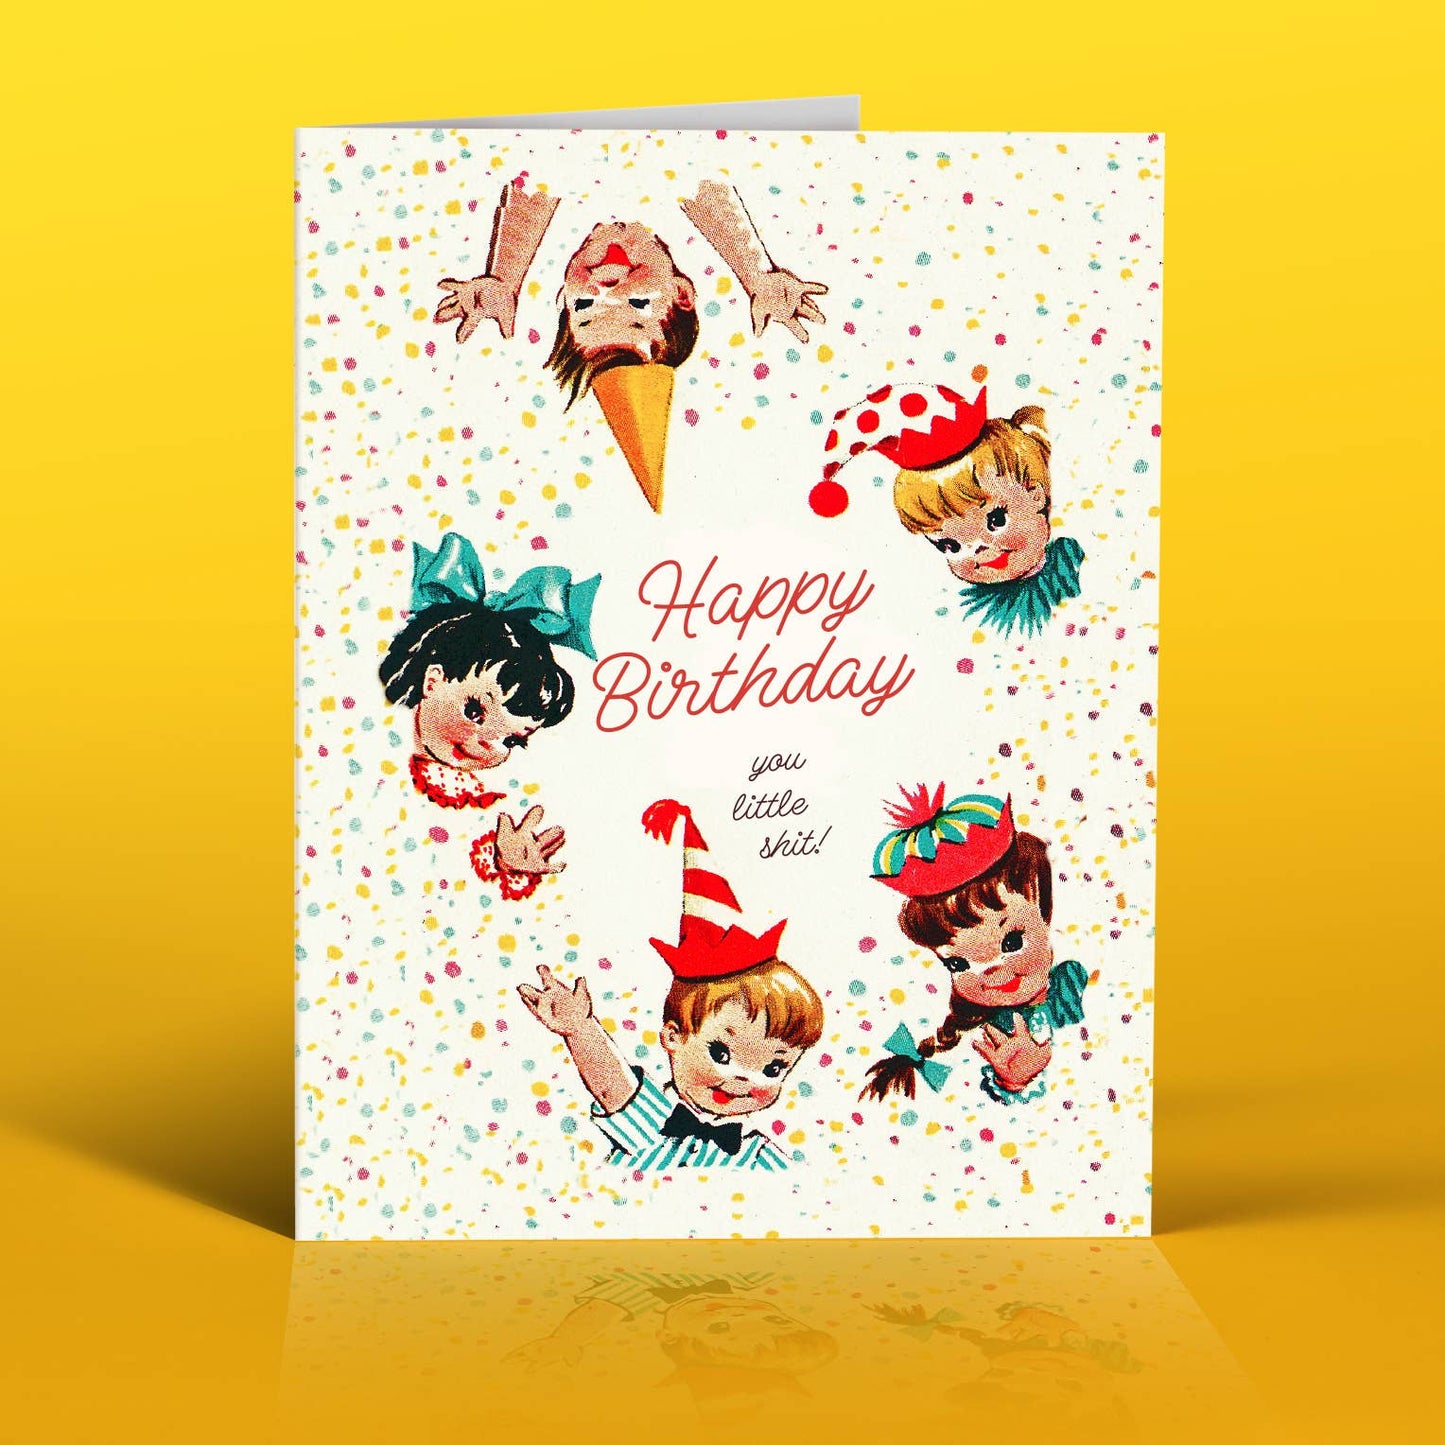 Greeting Card - Birthday: You Little Sh*T!